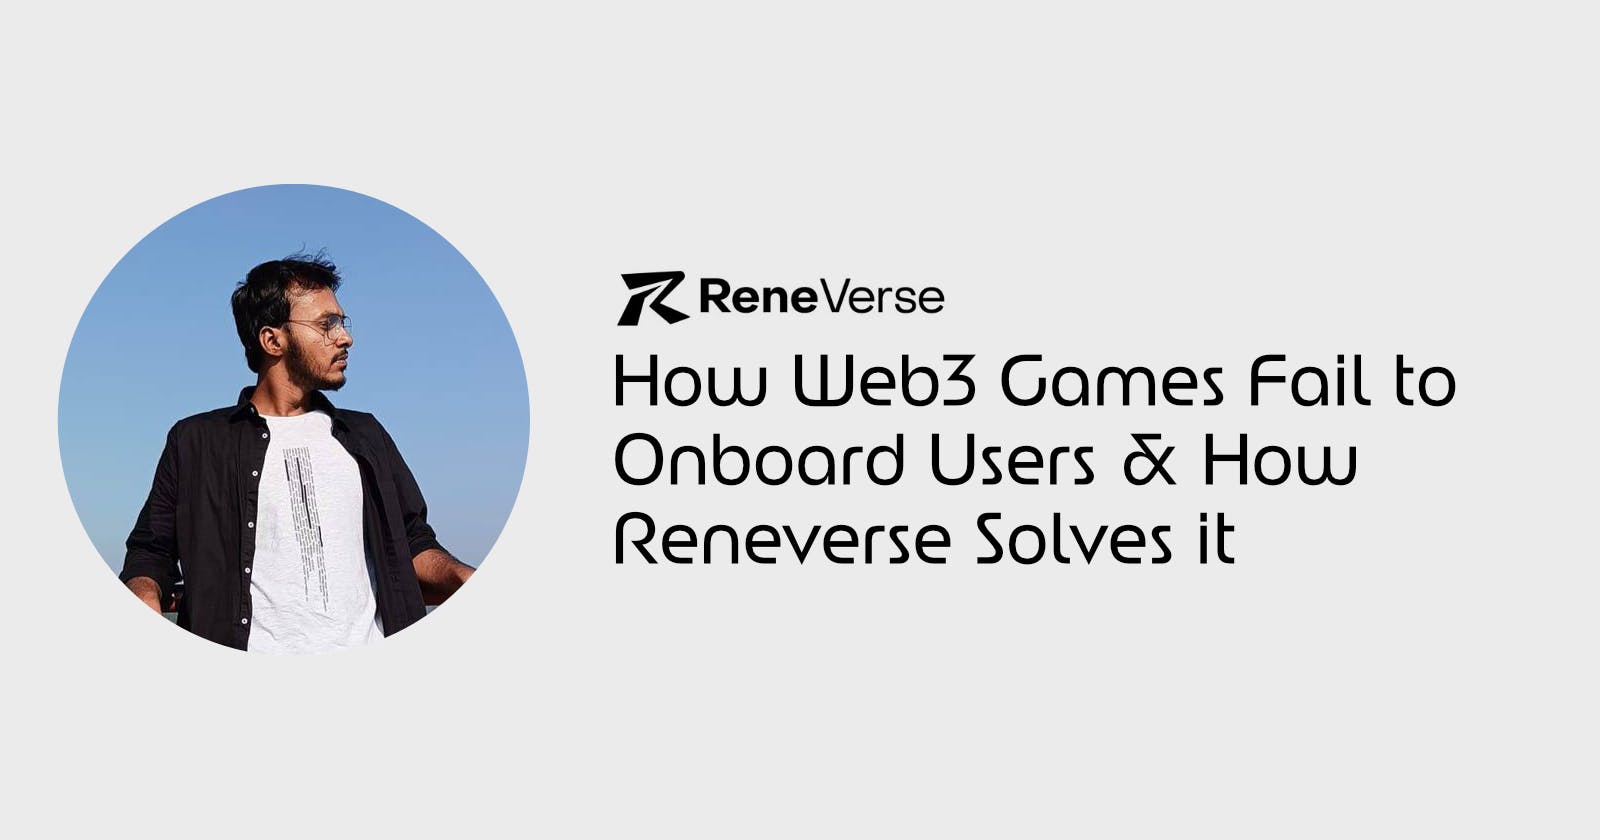 How Web3 Games Fail to Onboard Users & How Reneverse Solves it